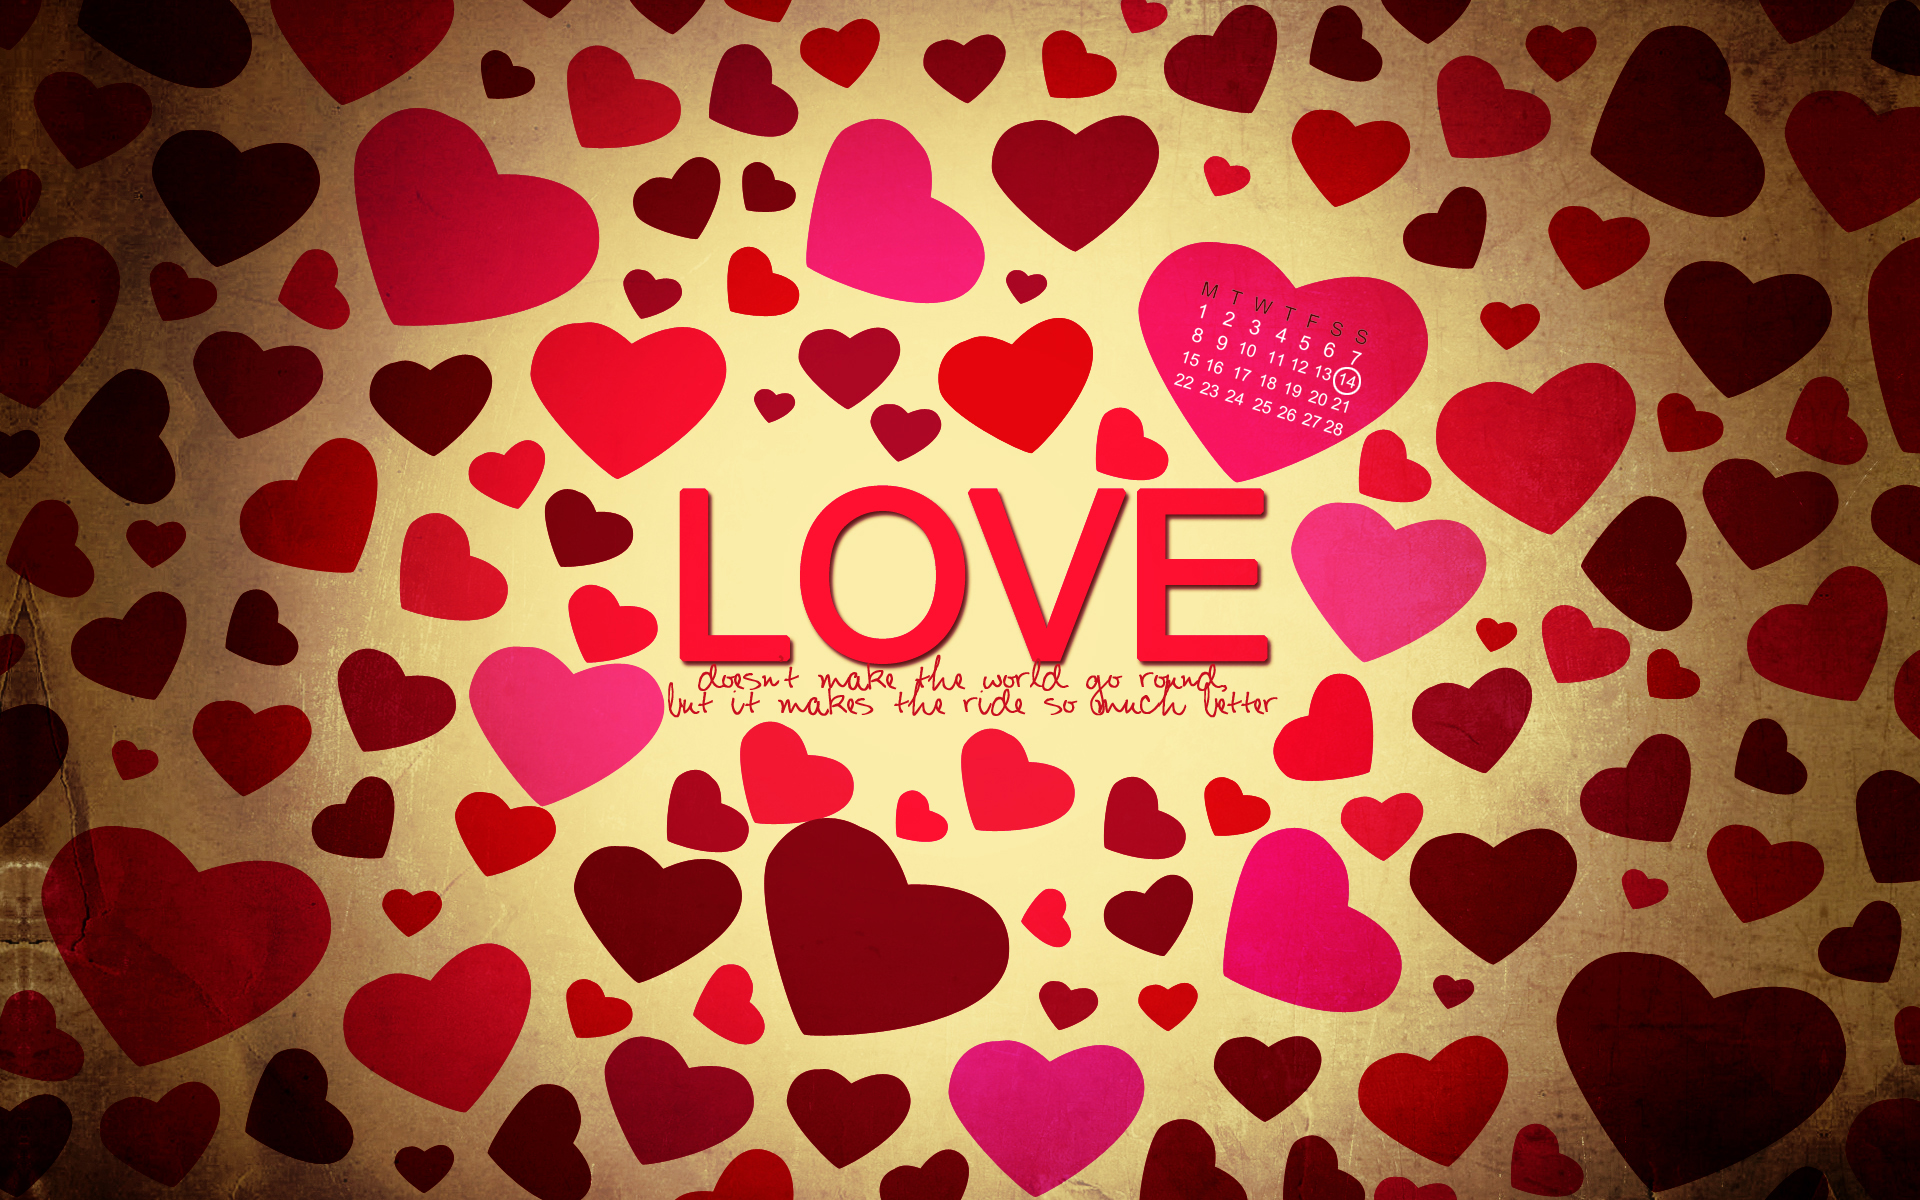 Countless Love Hearts Wallpapers | HD Wallpapers | ID #6595